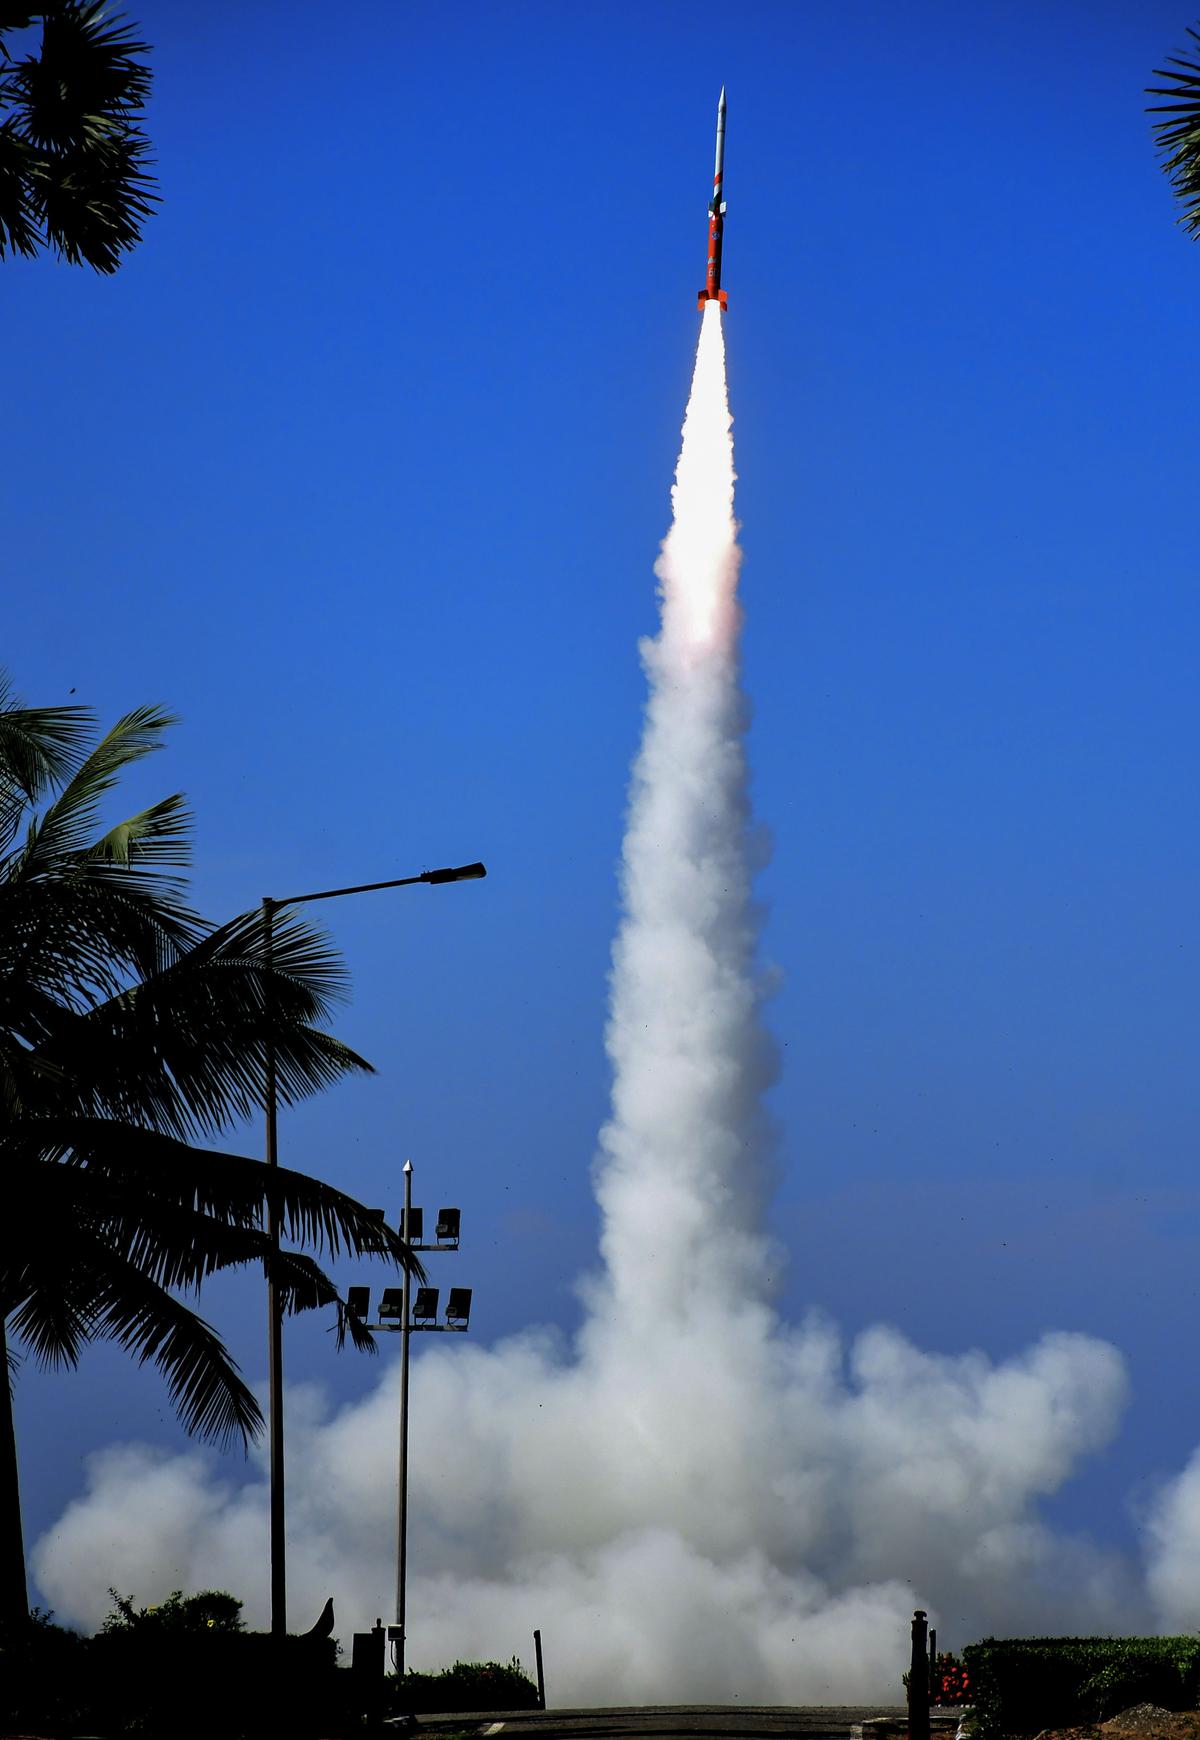 RH200 sounding rocket leaves a trail of smoke after its launch at Vikram Sarabhai Space Centre (VSSC), Thumba, during the 60th anniversery celebration of the first sounding rocket launch at VSSC in Thiruvanathapuram on November 25, 2023.